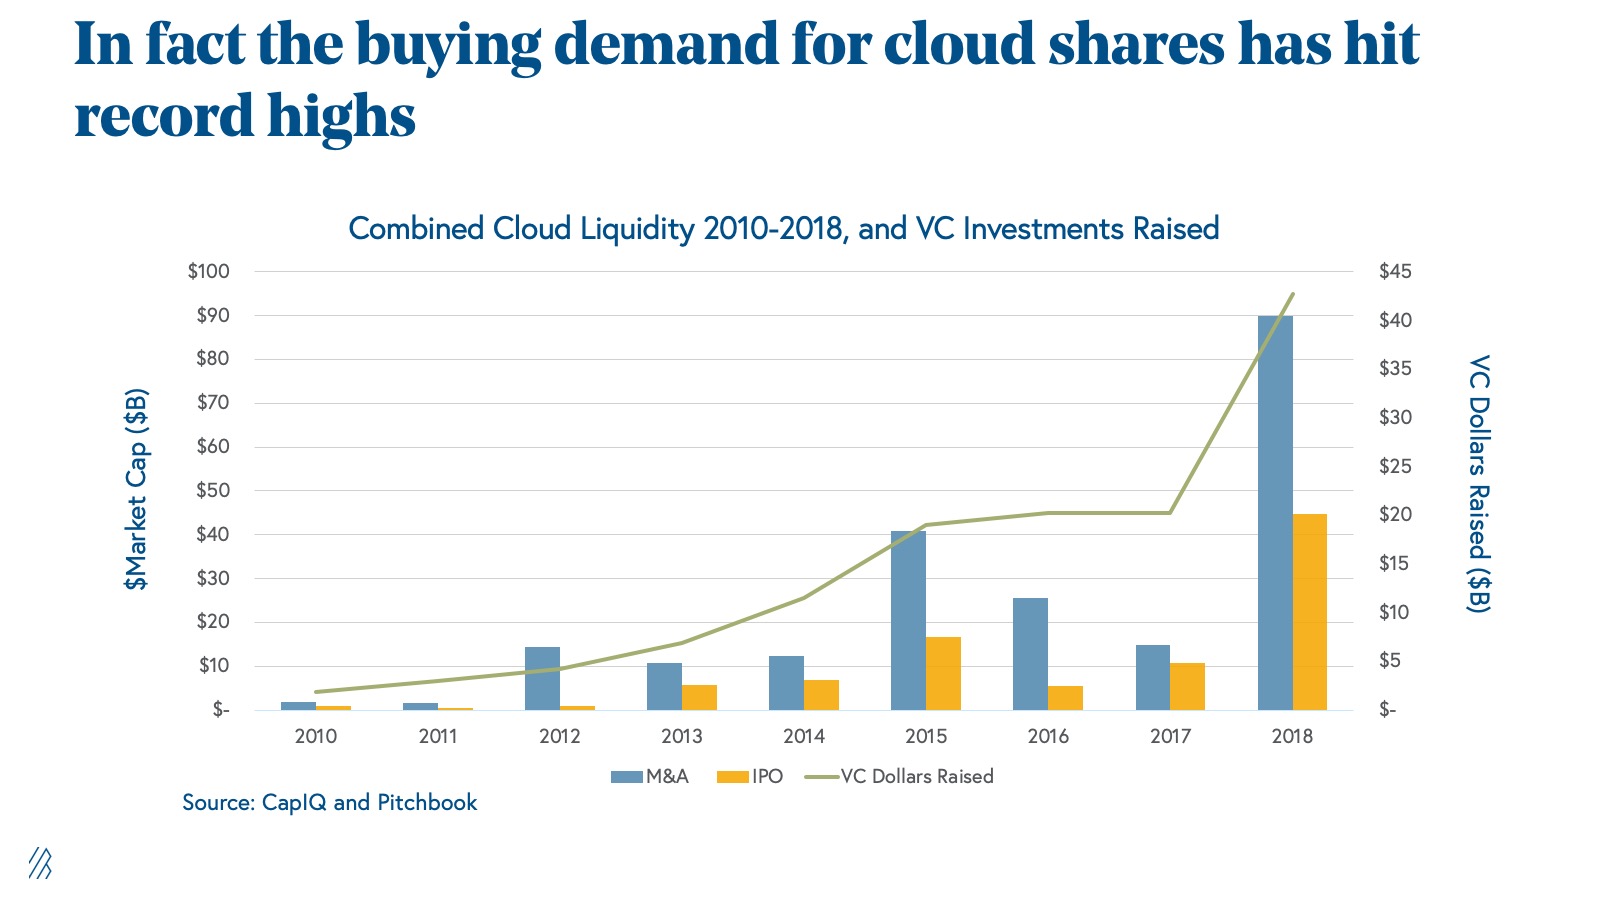 The demand for cloud shares and cloud liquidity hit record highs, outpacing 2015, which was the last record-breaking year.